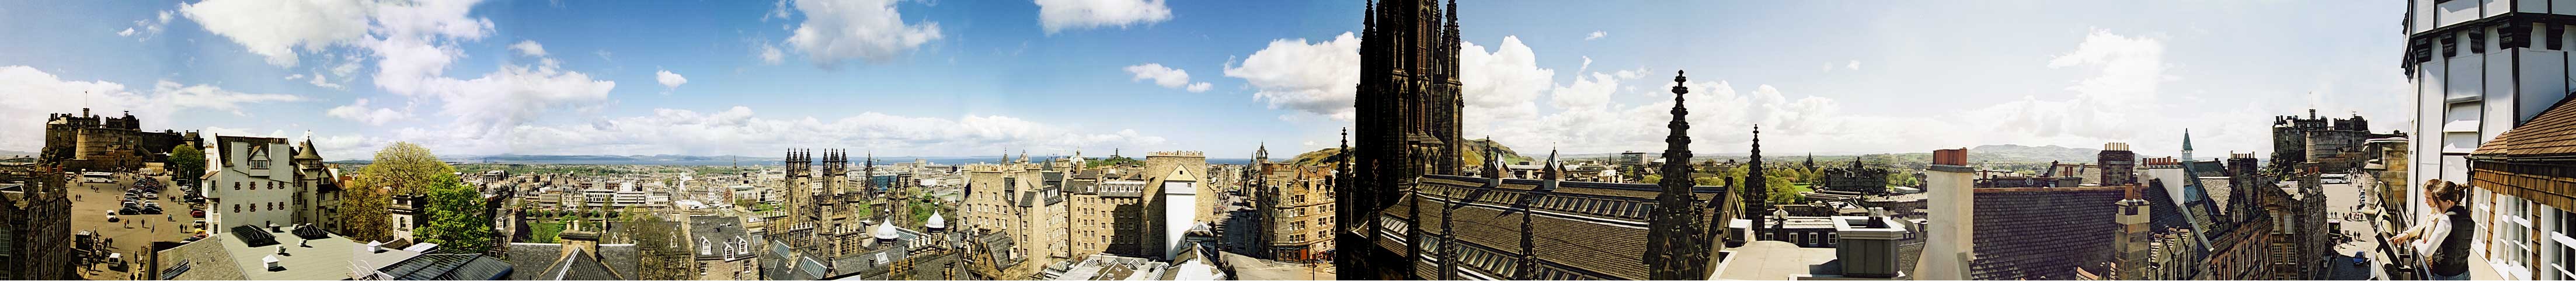 Panoramic Photograph Taken From The Camera Obscura In Edinburgh Scotland